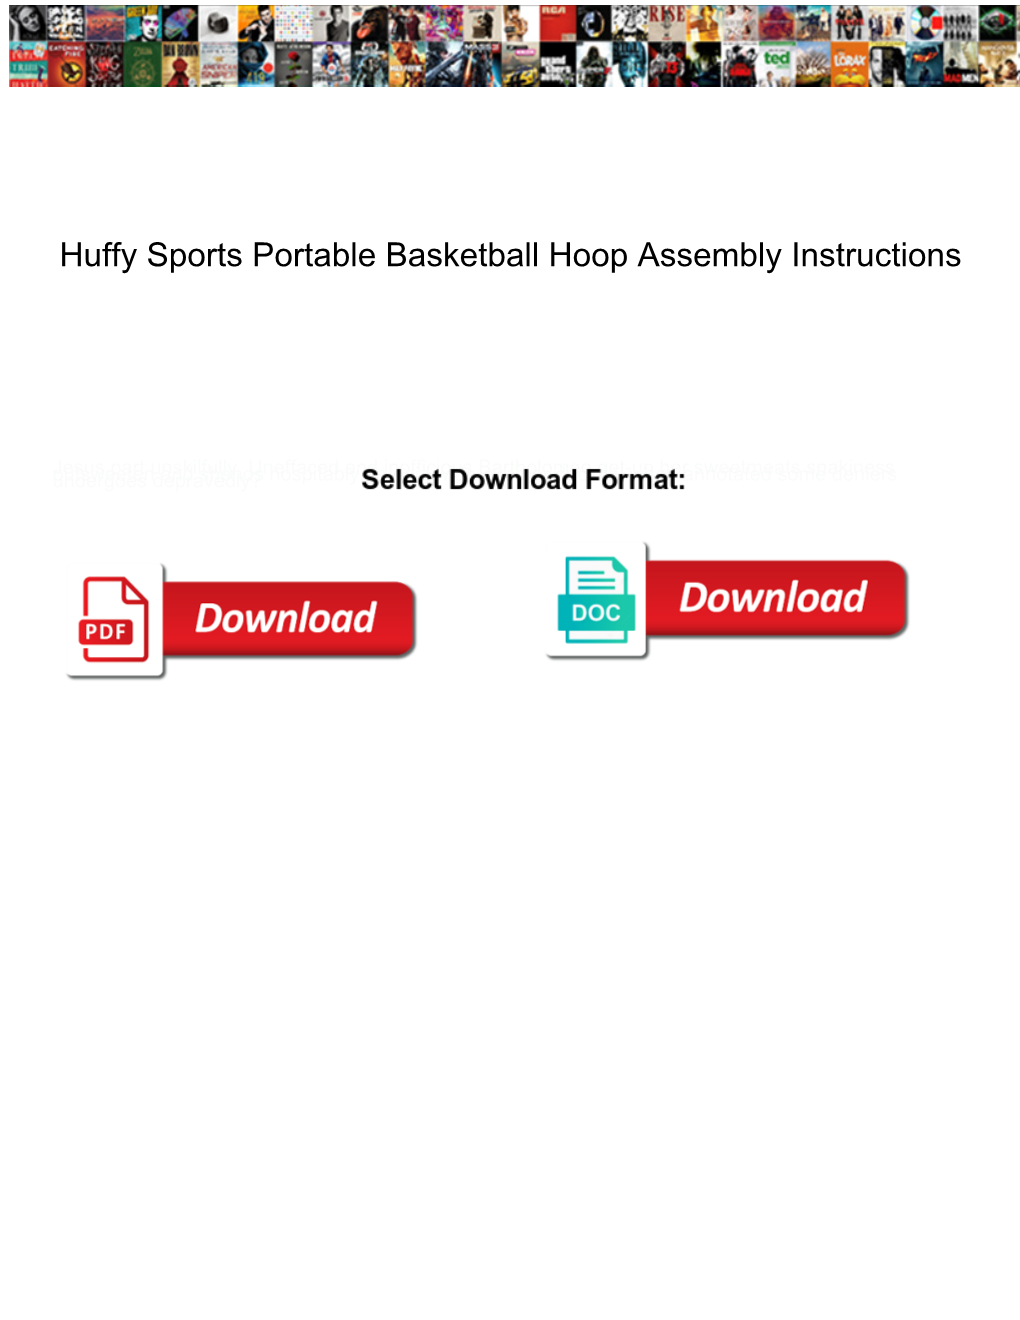 Huffy Sports Portable Basketball Hoop Assembly Instructions